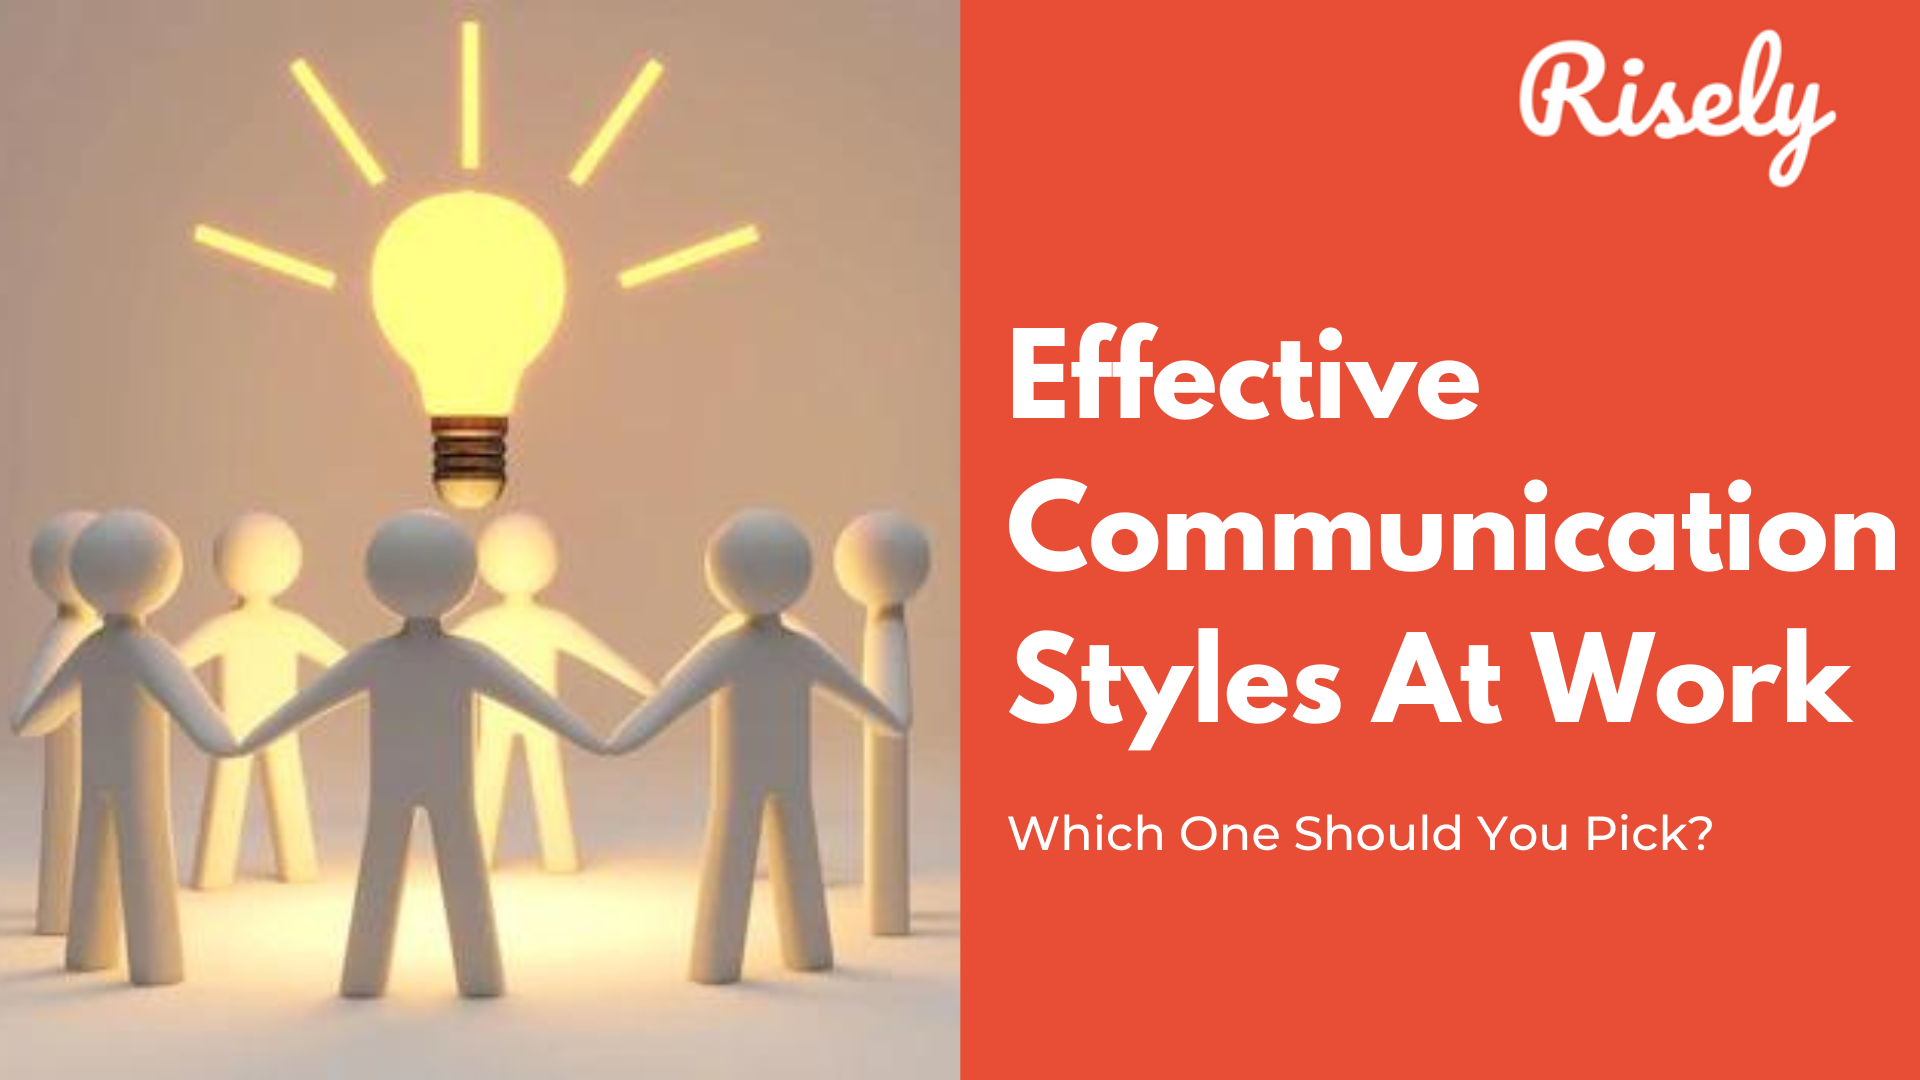 Effective Communication Styles At Work: Which One Should You Pick?